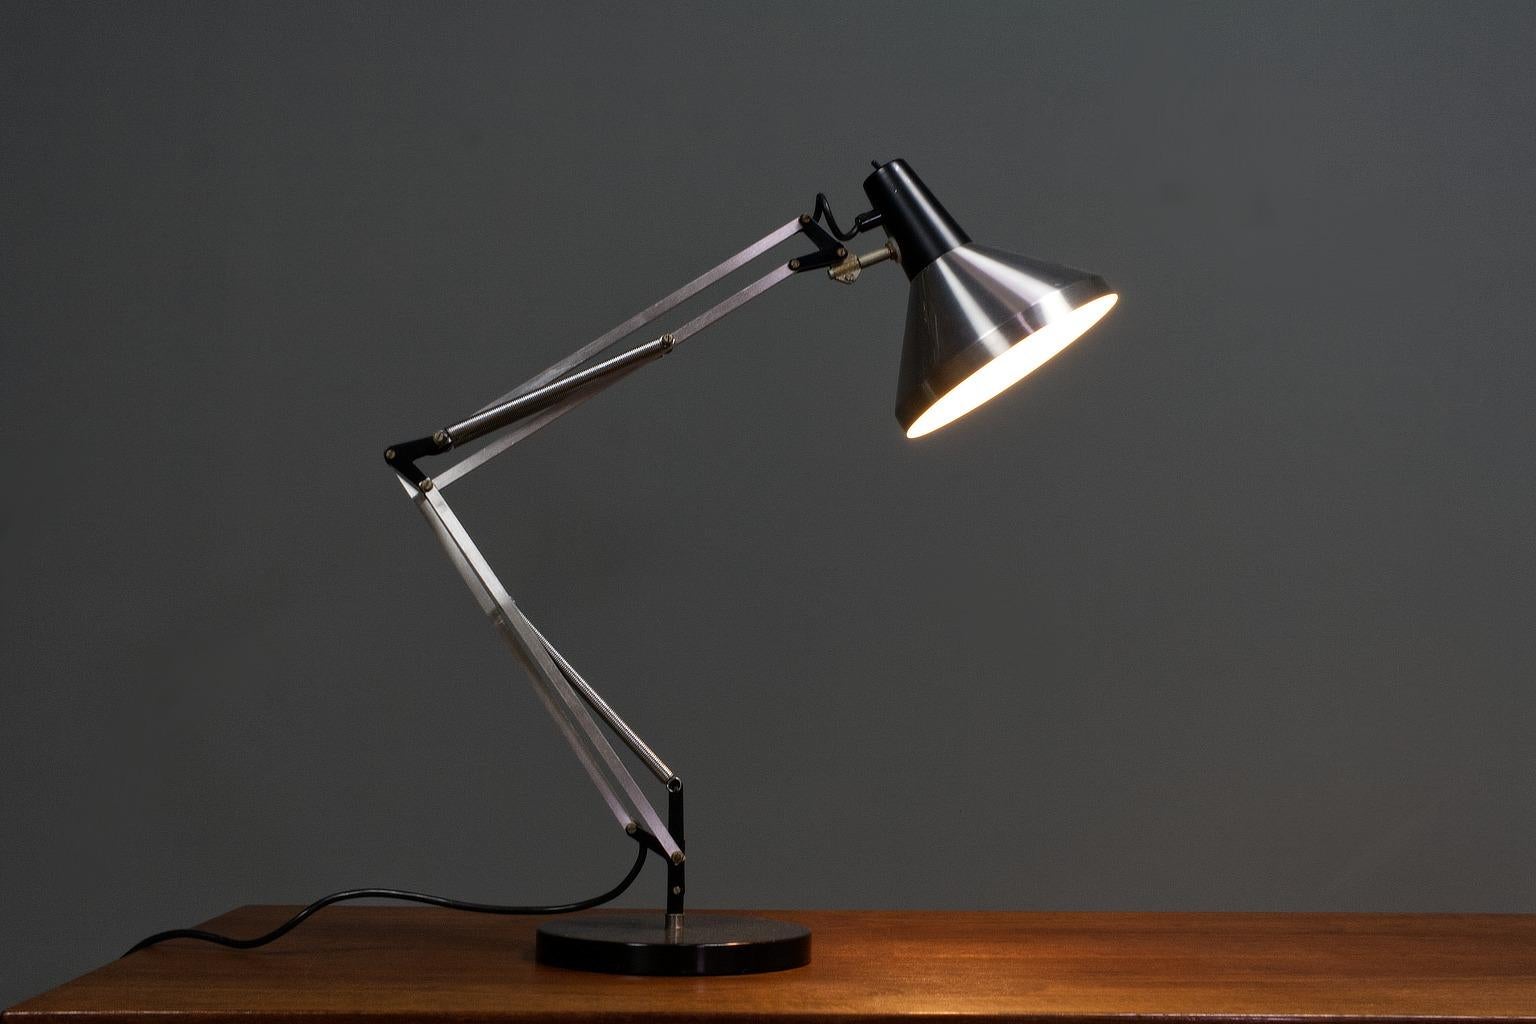 Lacquered Large Mid-Century Modern Desk Light or Table Lamp in White by Hala 1967, T9